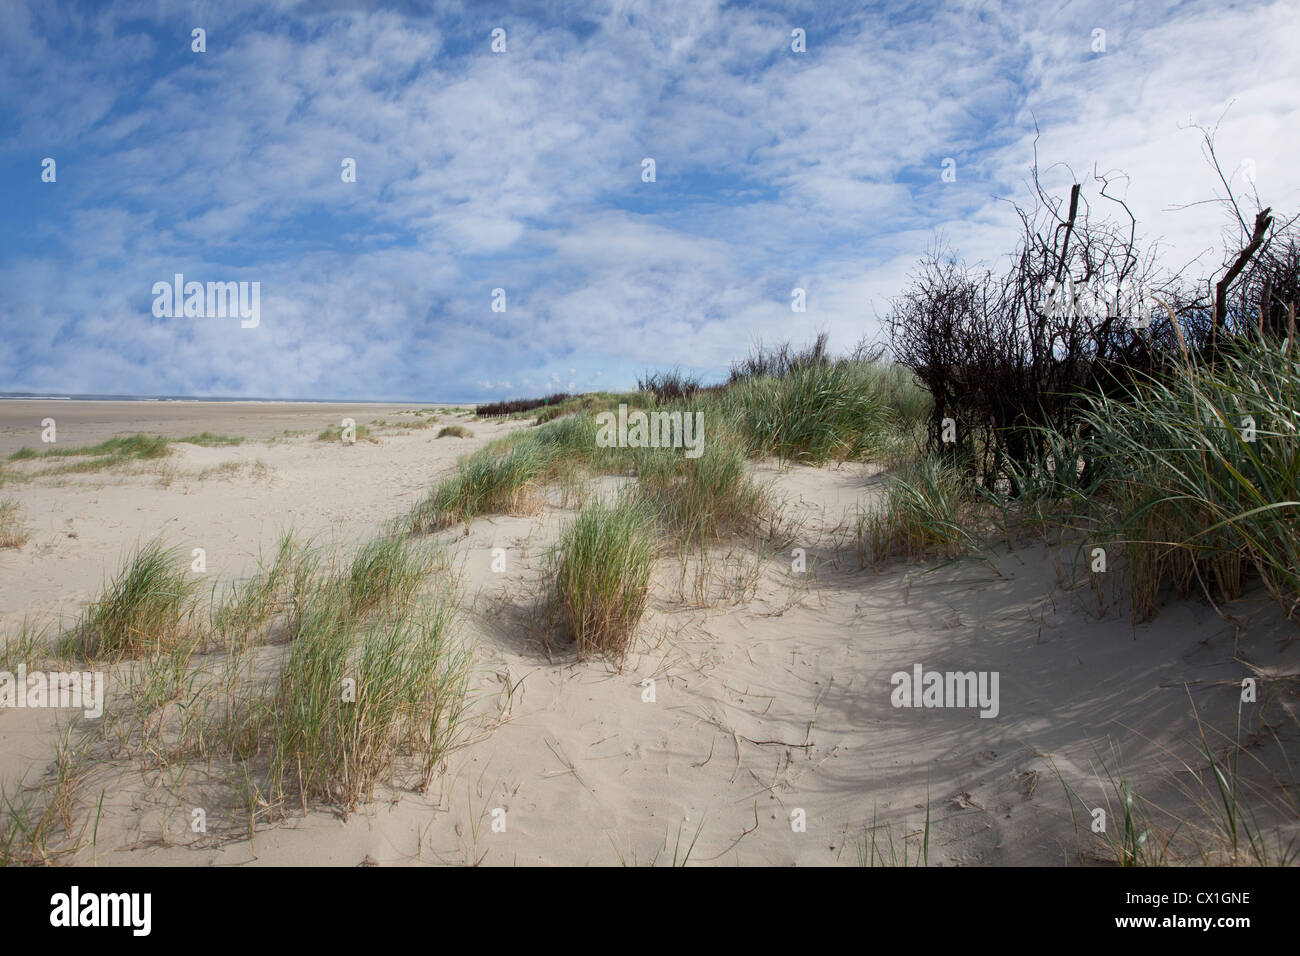 Europe, Germany, Friesland, Borkum Dunes silence relaxing sand beach nature relaxation deceleraterest recovery summer time holiday Entspannung Stille Stock Photo